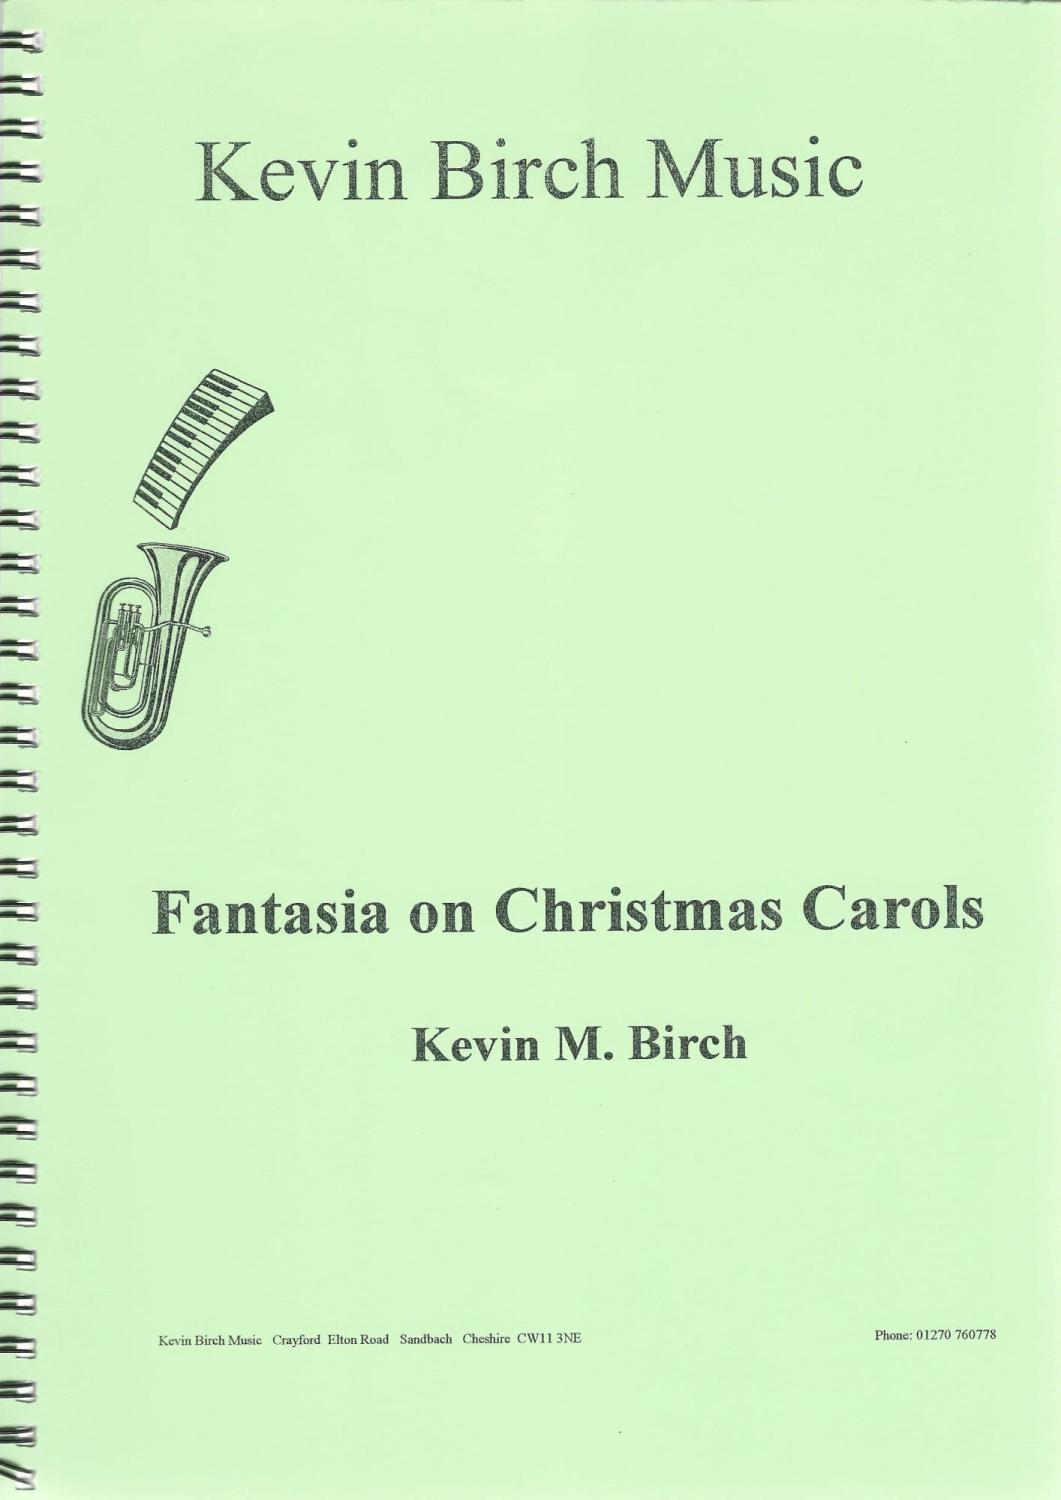 Fantasia on Christmas Carols for Brass Band - Kevin M. Birch